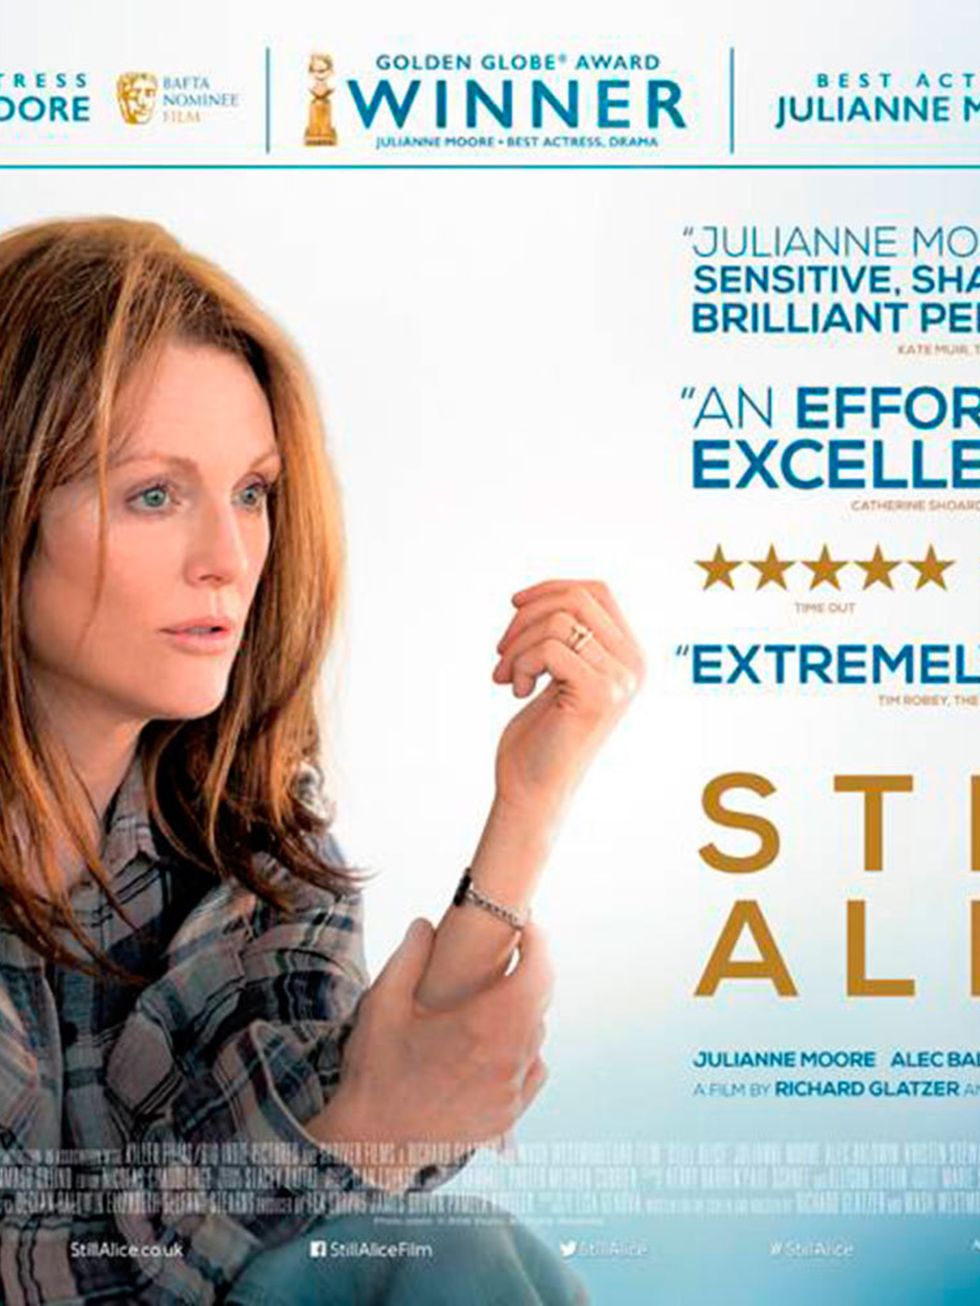 <p>FILM: Still Alice</p>

<p>In this Oscar-winning perfromance the incredible Julianne Moore portrays a professor who is diagnosed with early-onset Alzheimers disease. Following the devastating news Alice grapples to hold on to the memories and people sh